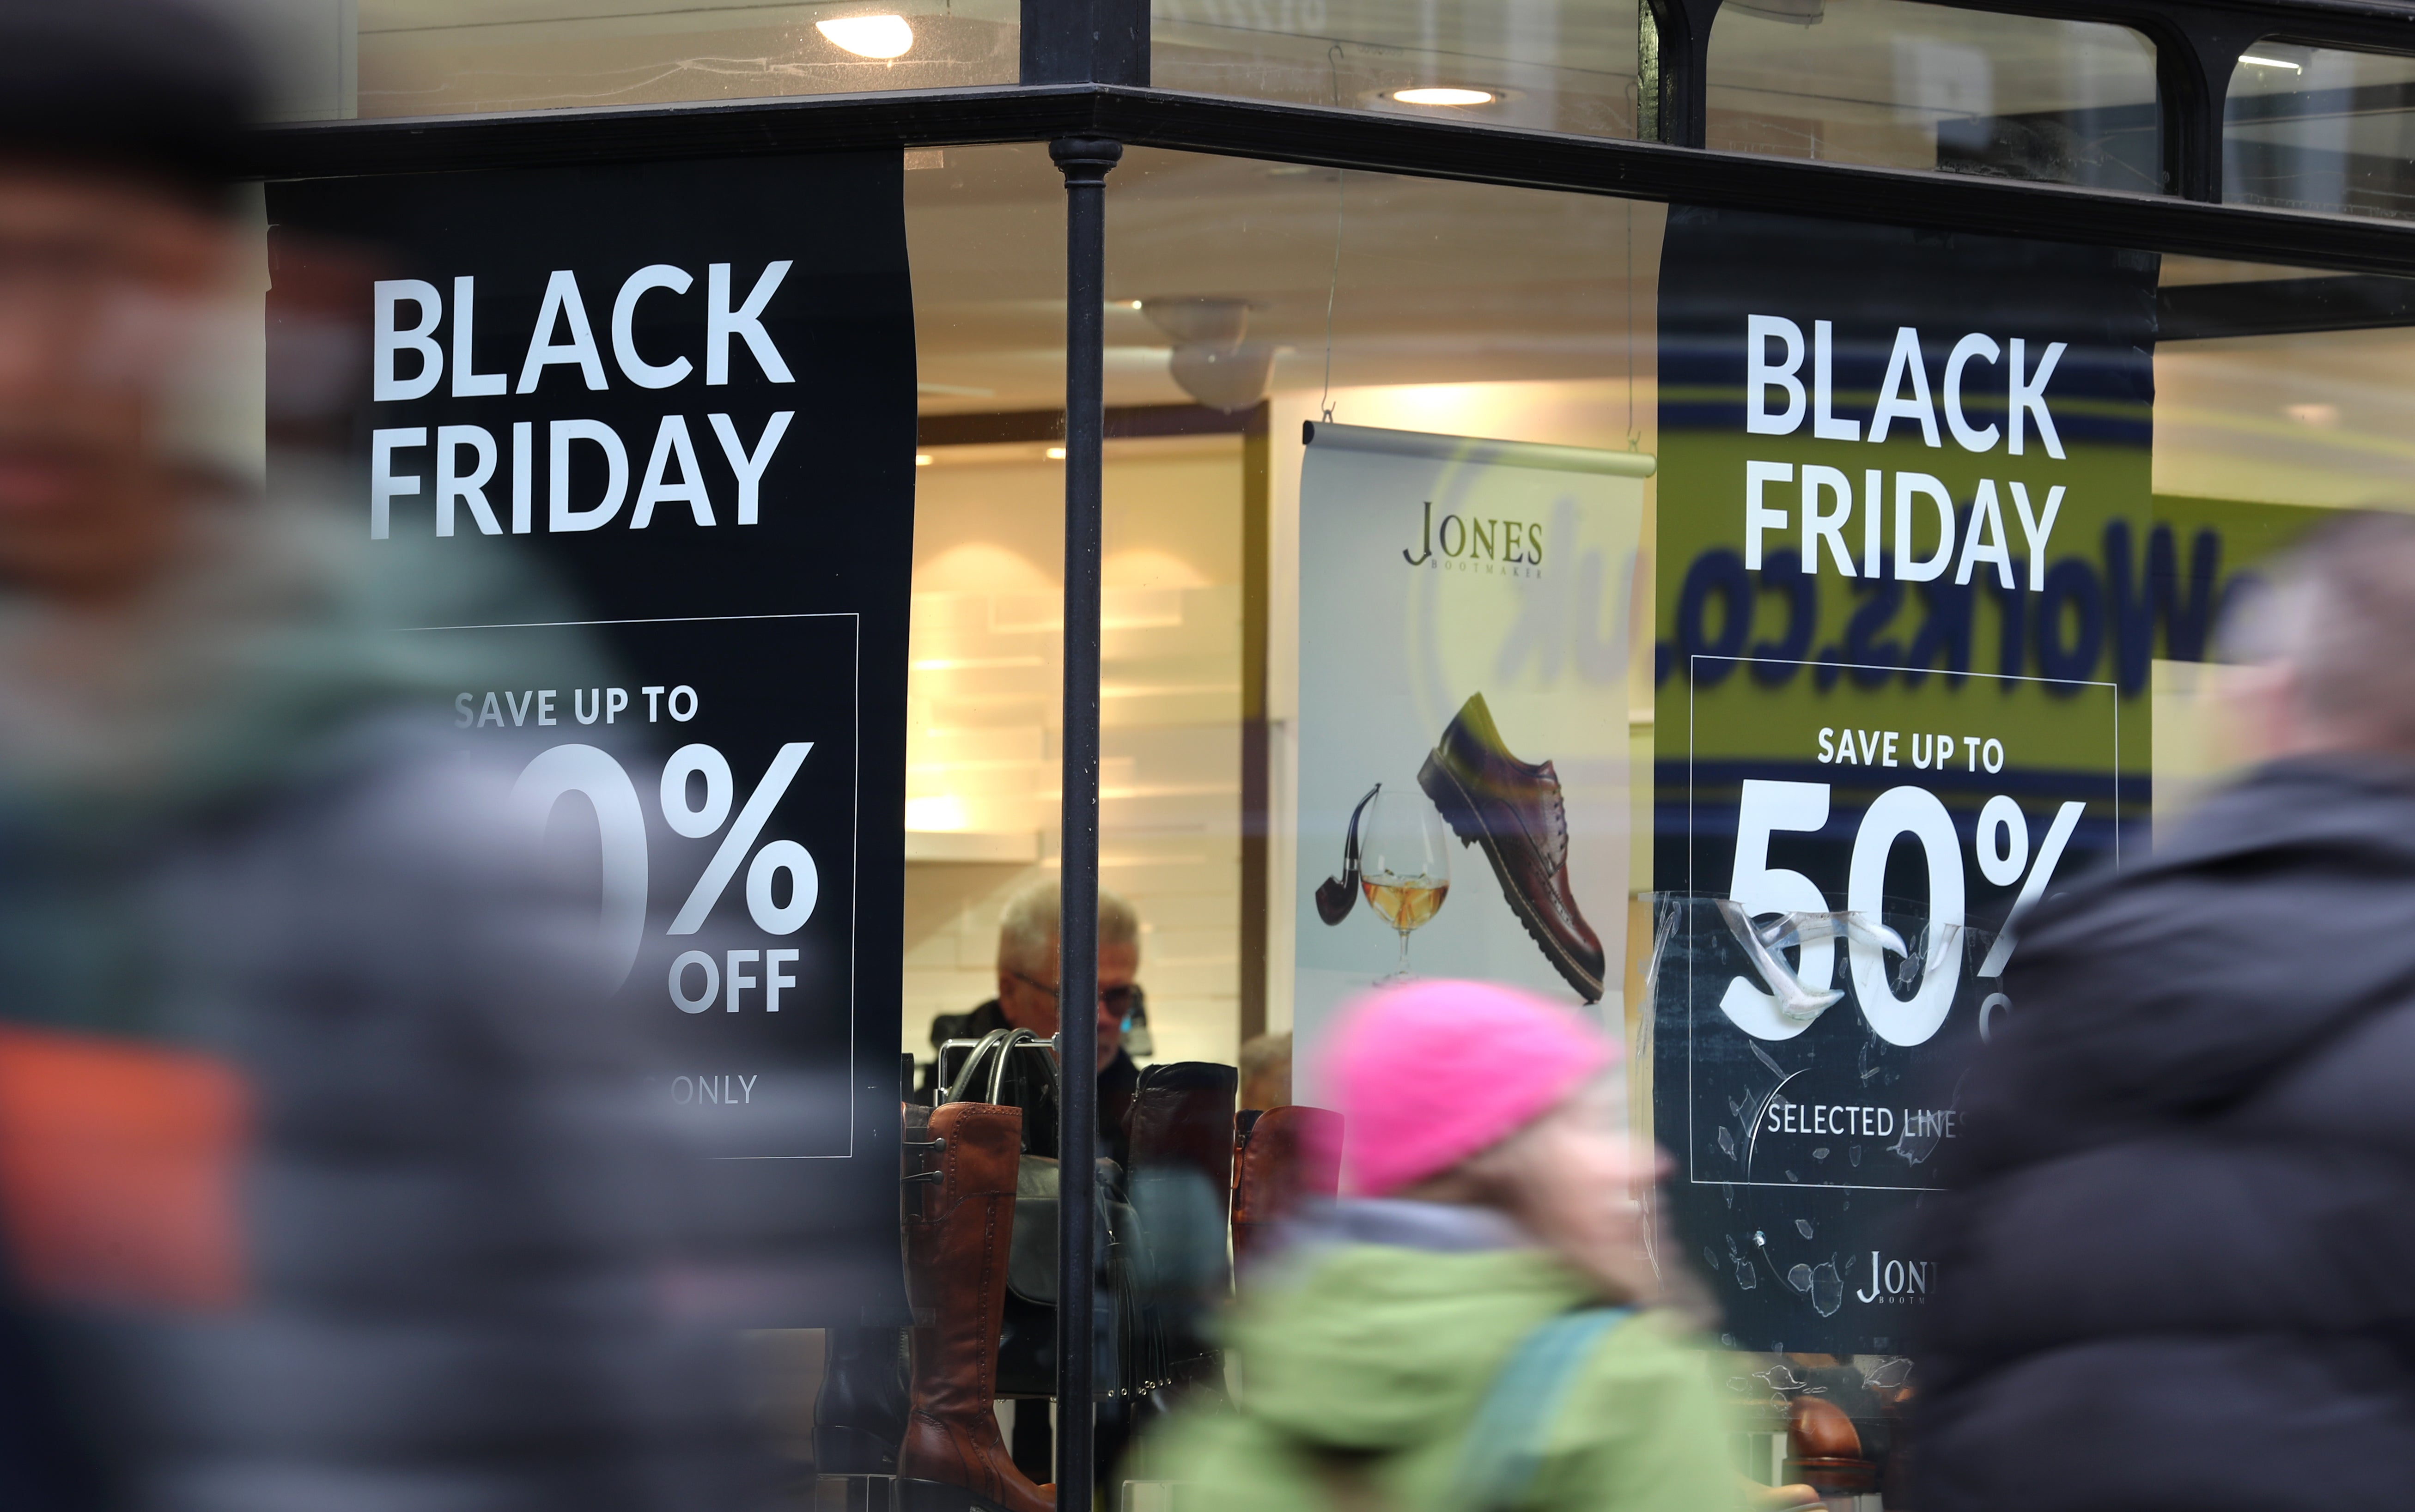 Shoppers are expected to spend £9 billion on Black Friday (Gareth Fuller/PA)